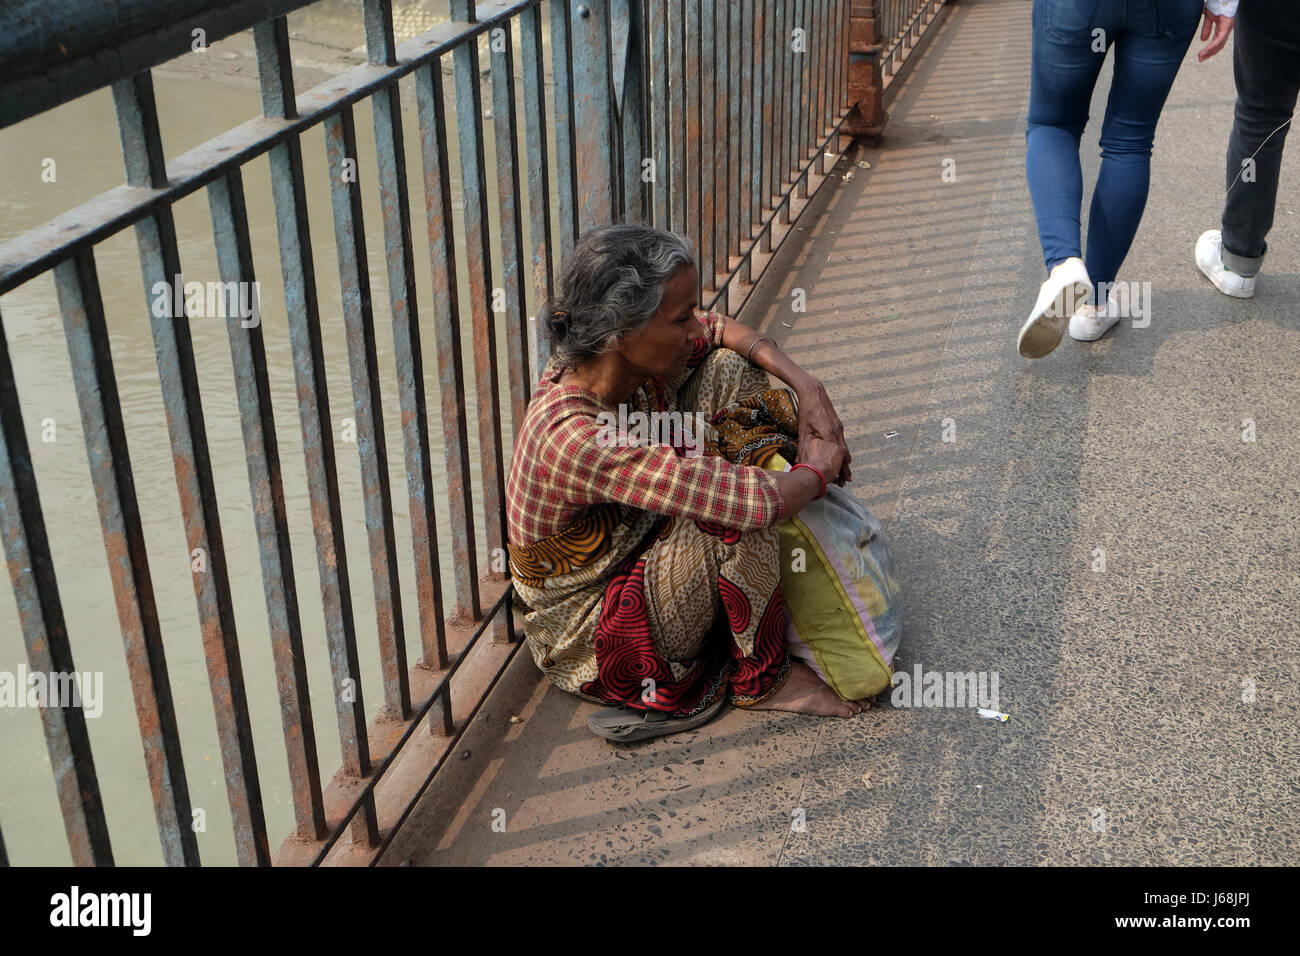 Beggars are the most disadvantaged castes living in the streets, Kolkata, India Stock Photo